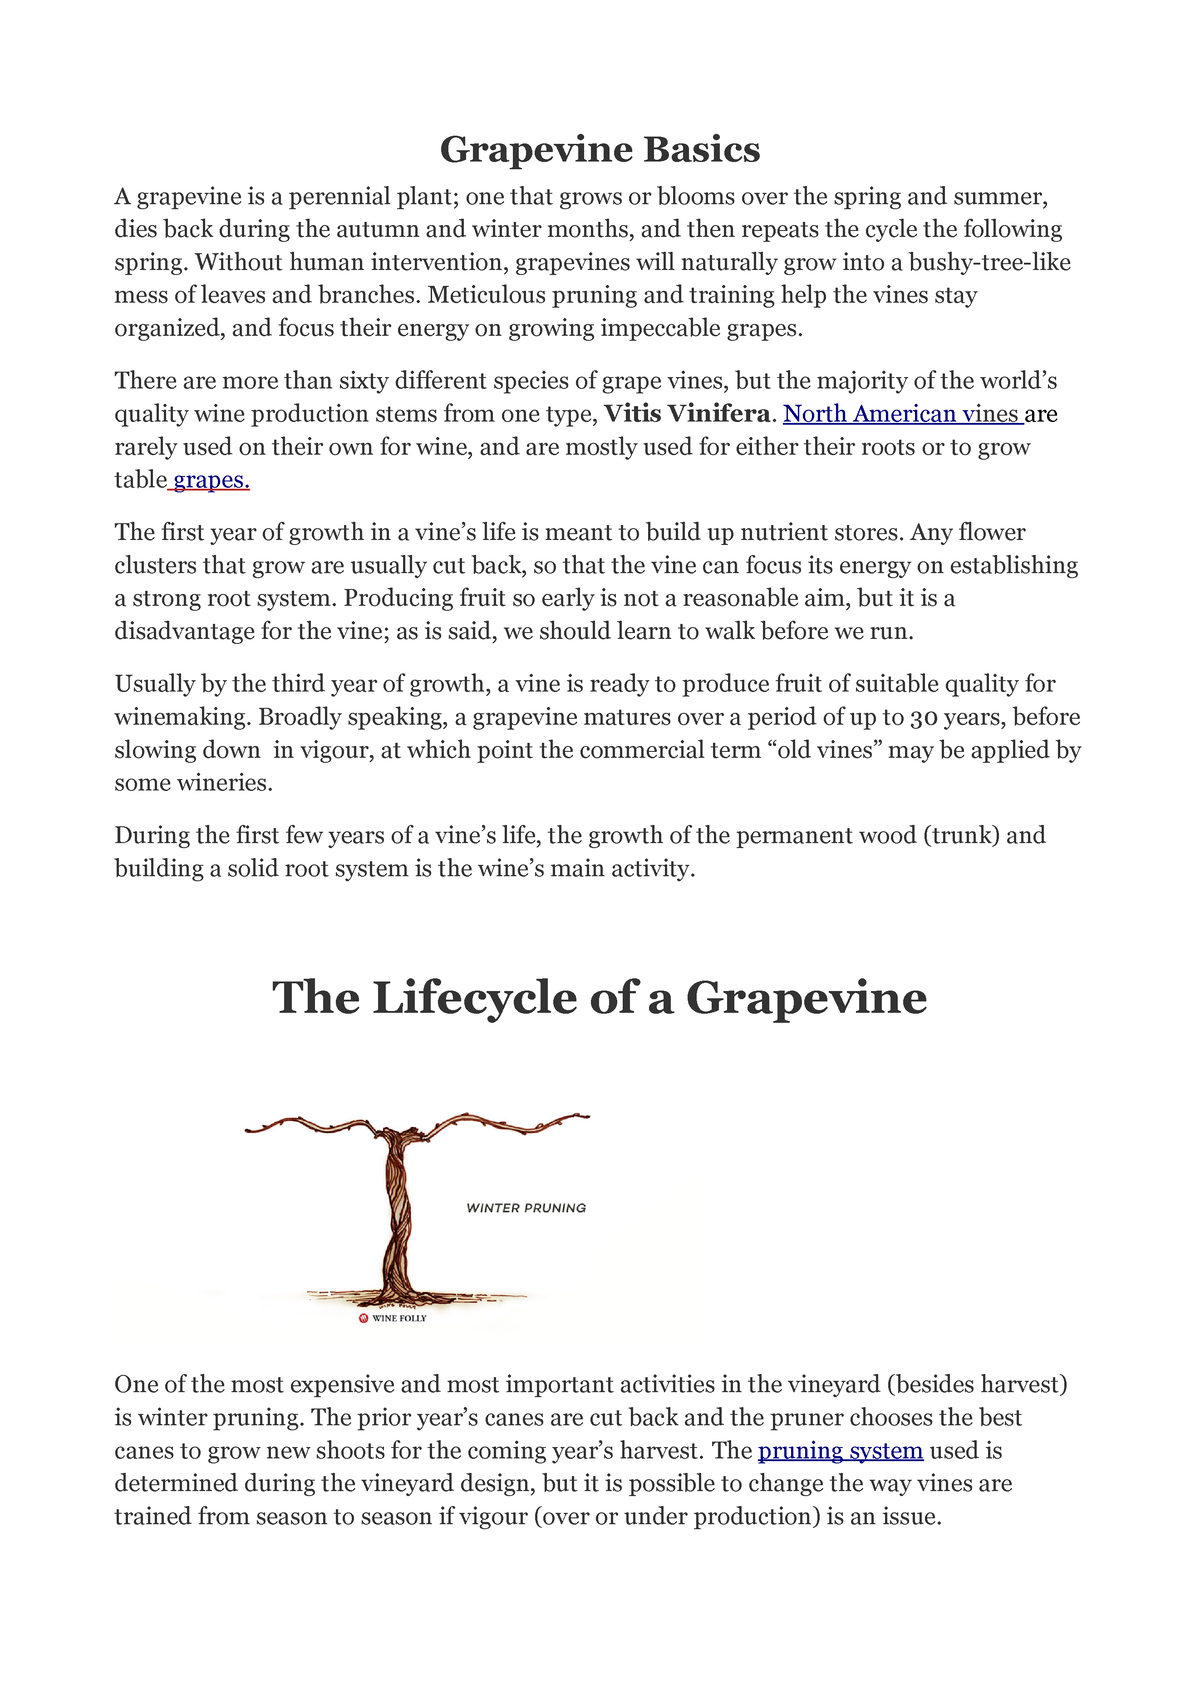 The lifecycle of a grapevine